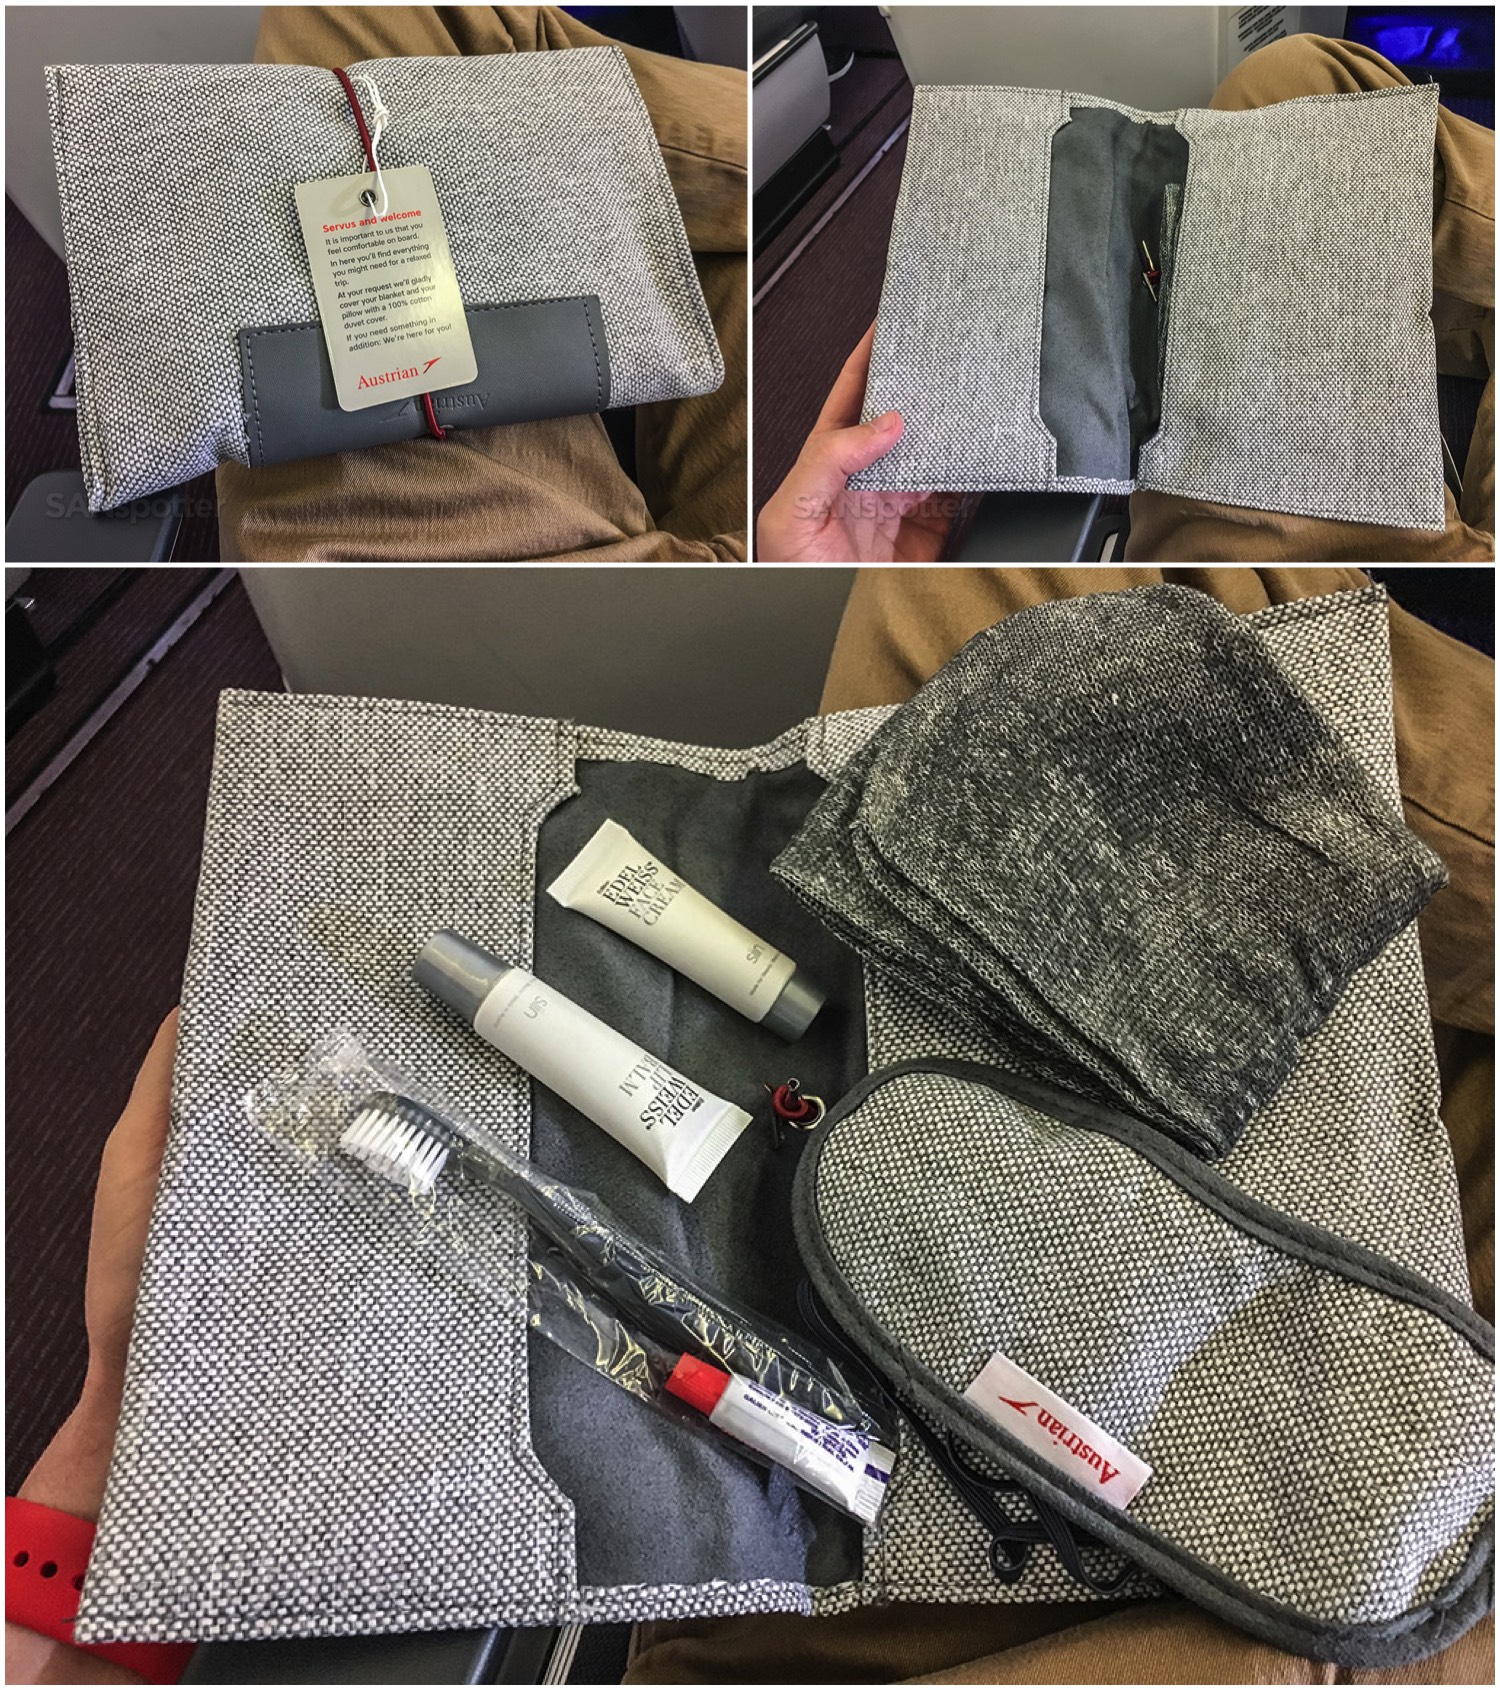 Austrian Airlines business class amenity kit